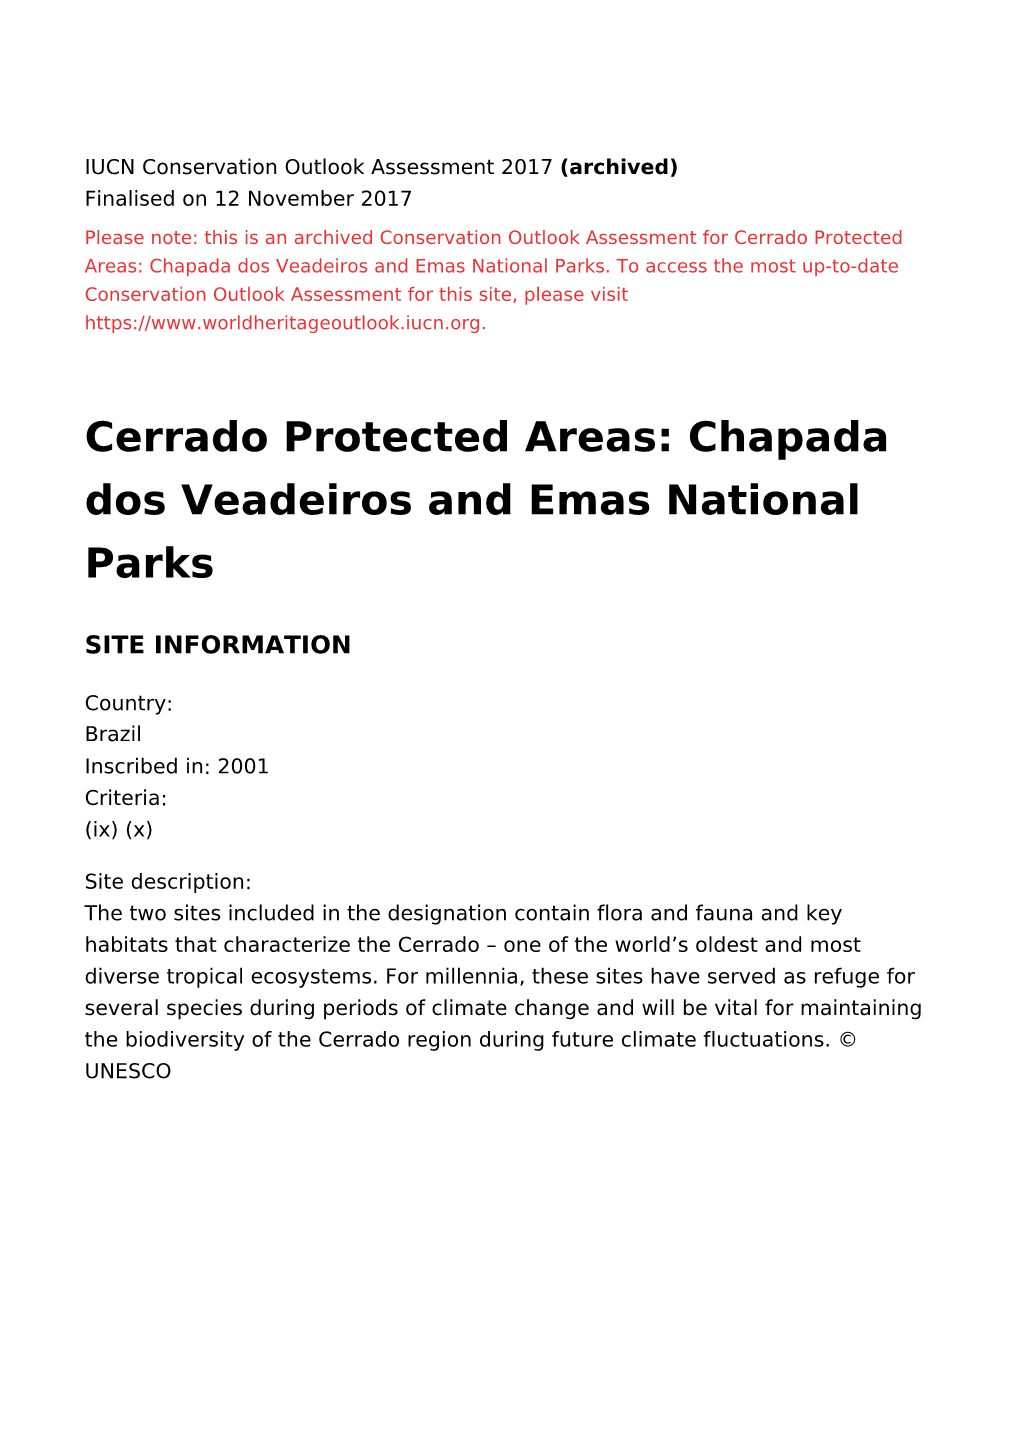 Cerrado Protected Areas: Chapada Dos Veadeiros and Emas National Parks - 2017 Conservation Outlook Assessment (Archived)